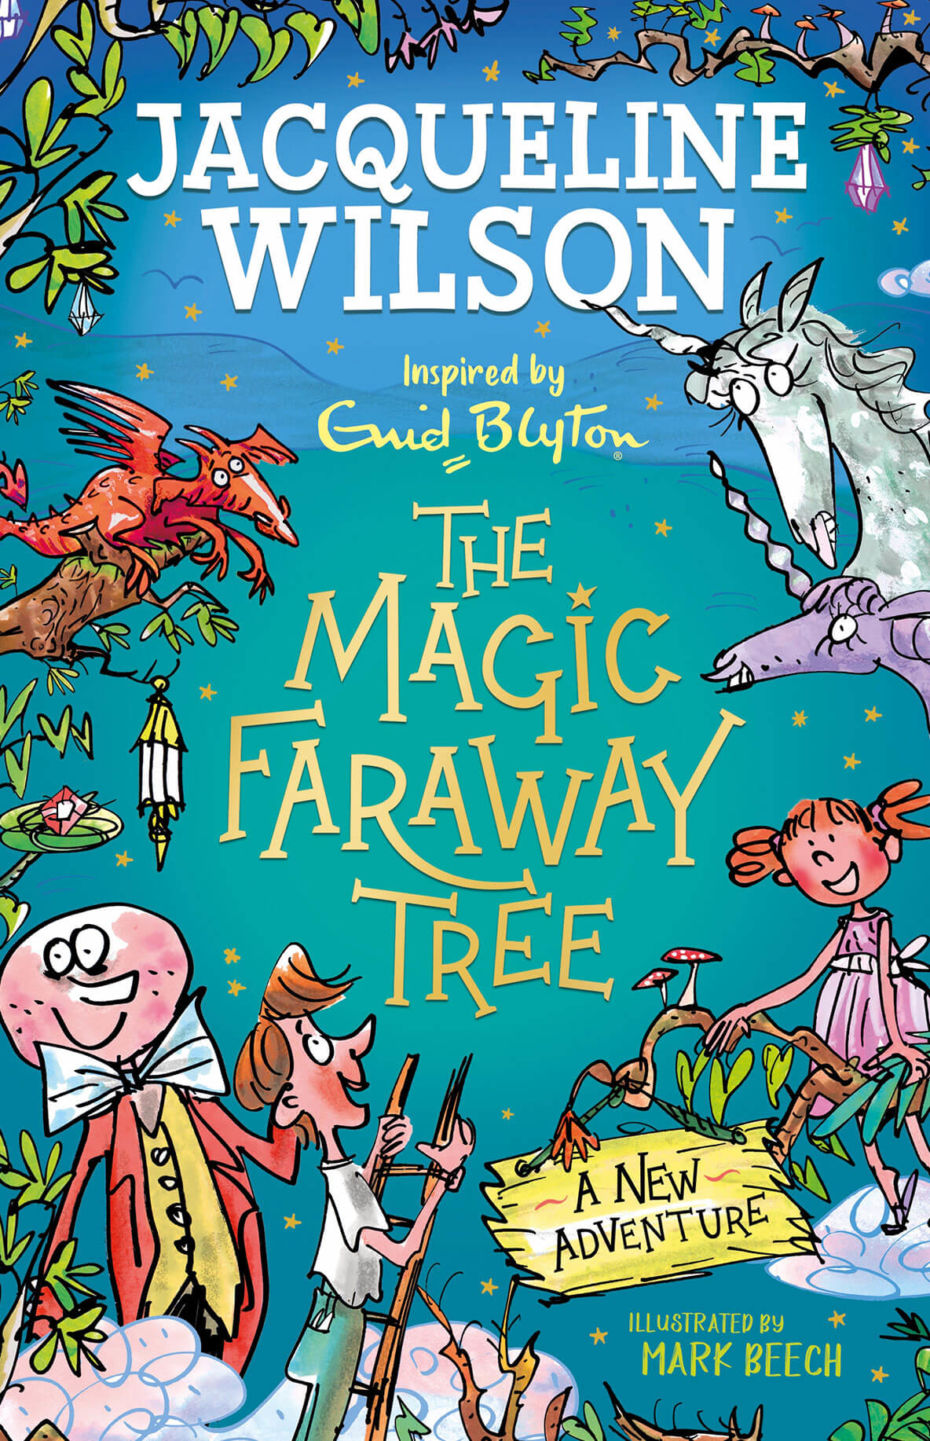 Book jacket for The Faraway Tree by Jaqueline Wilson